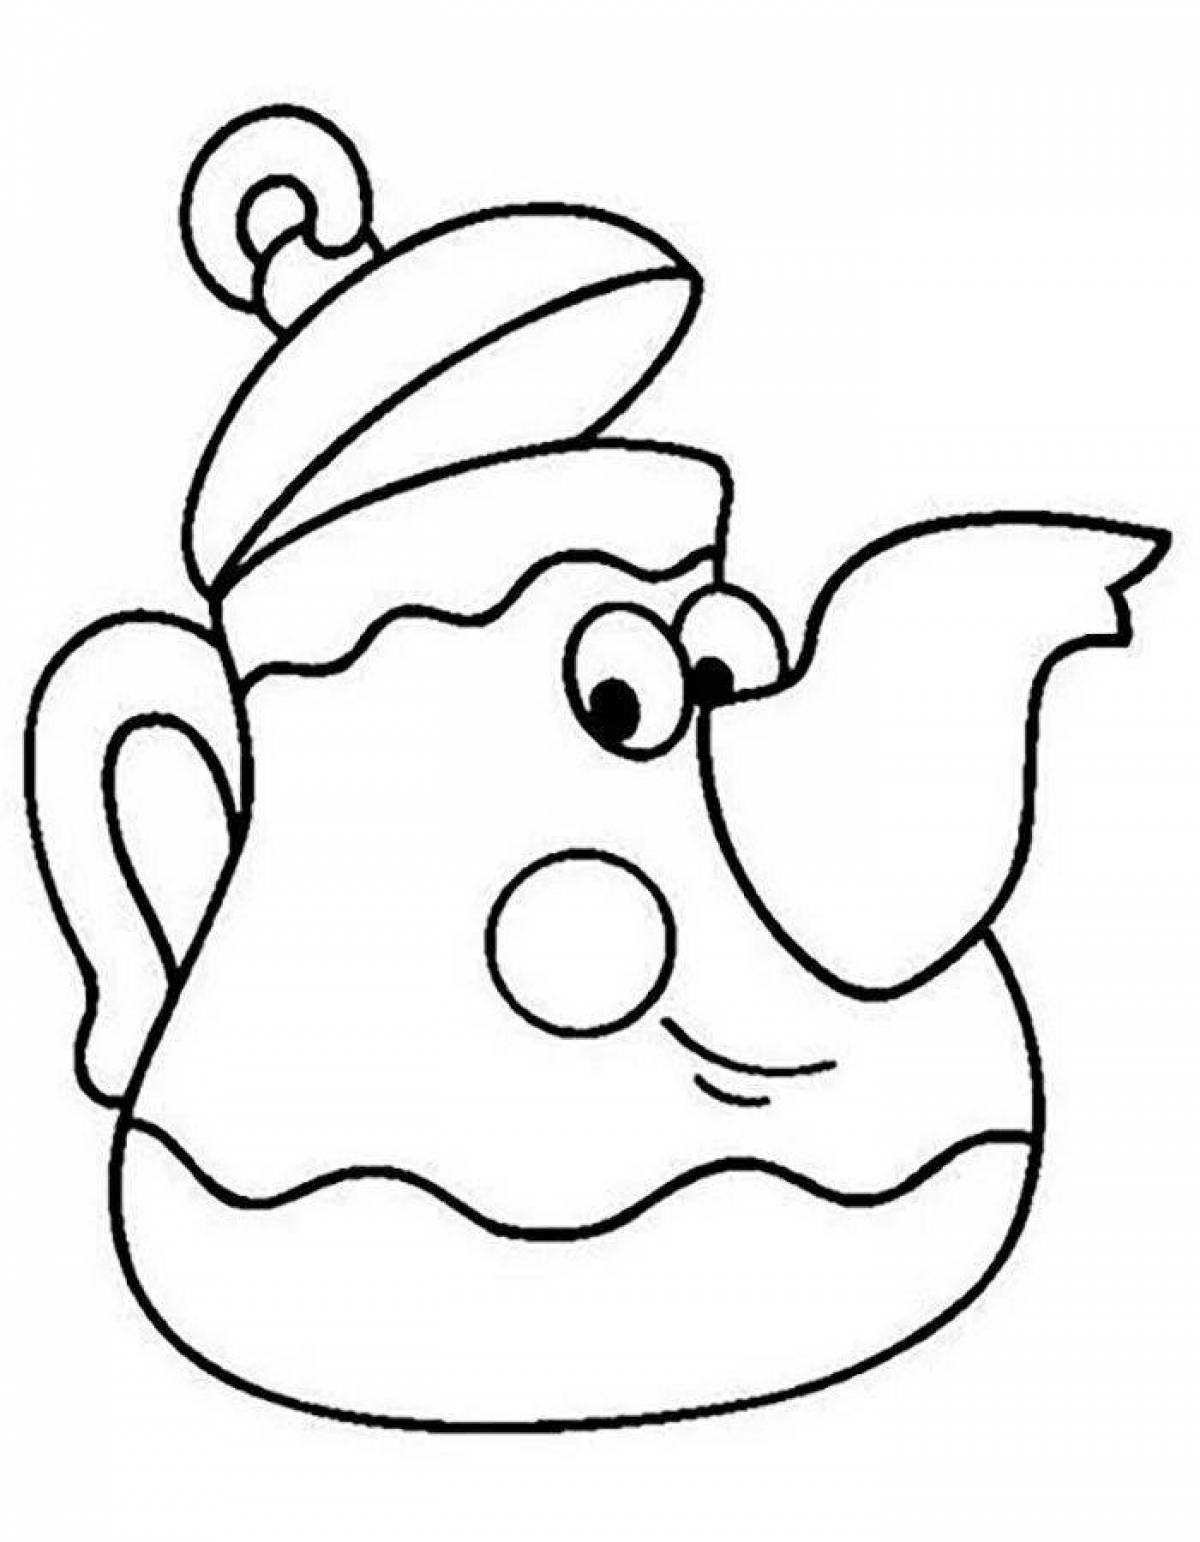 Creative teapot coloring book for kids